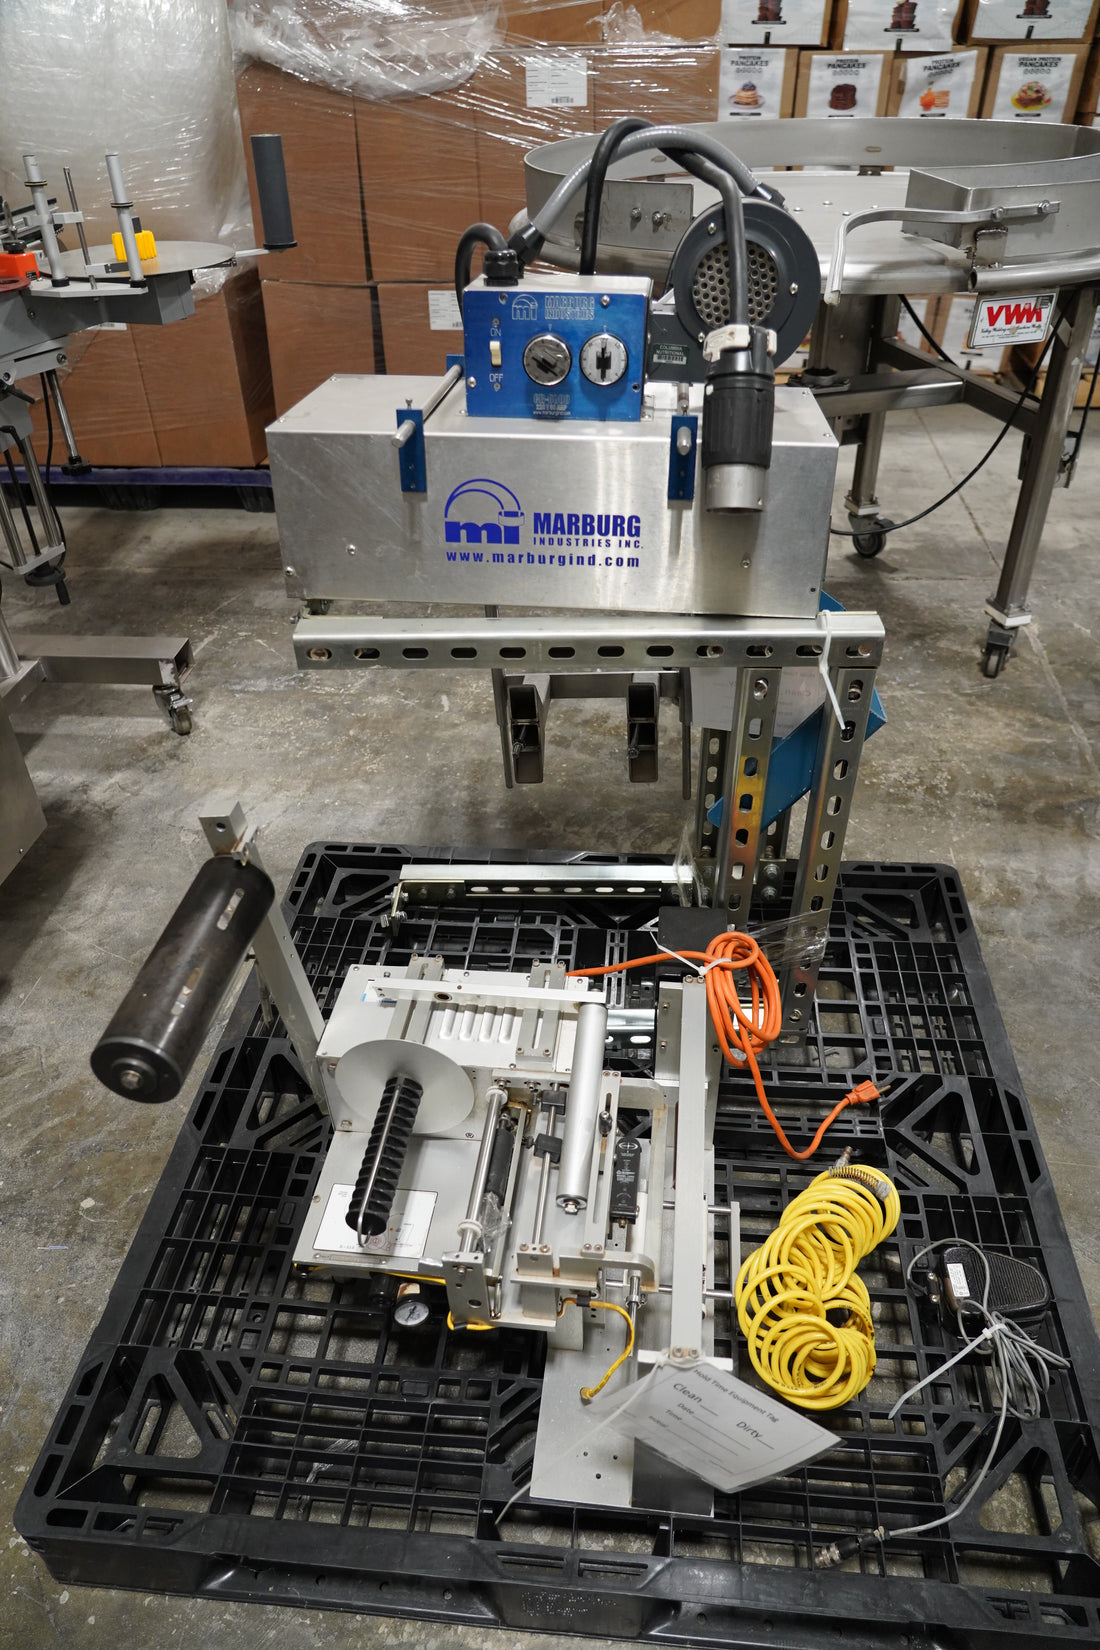 Quality Lab Equipment Auction - In Partnership with Proxio Group